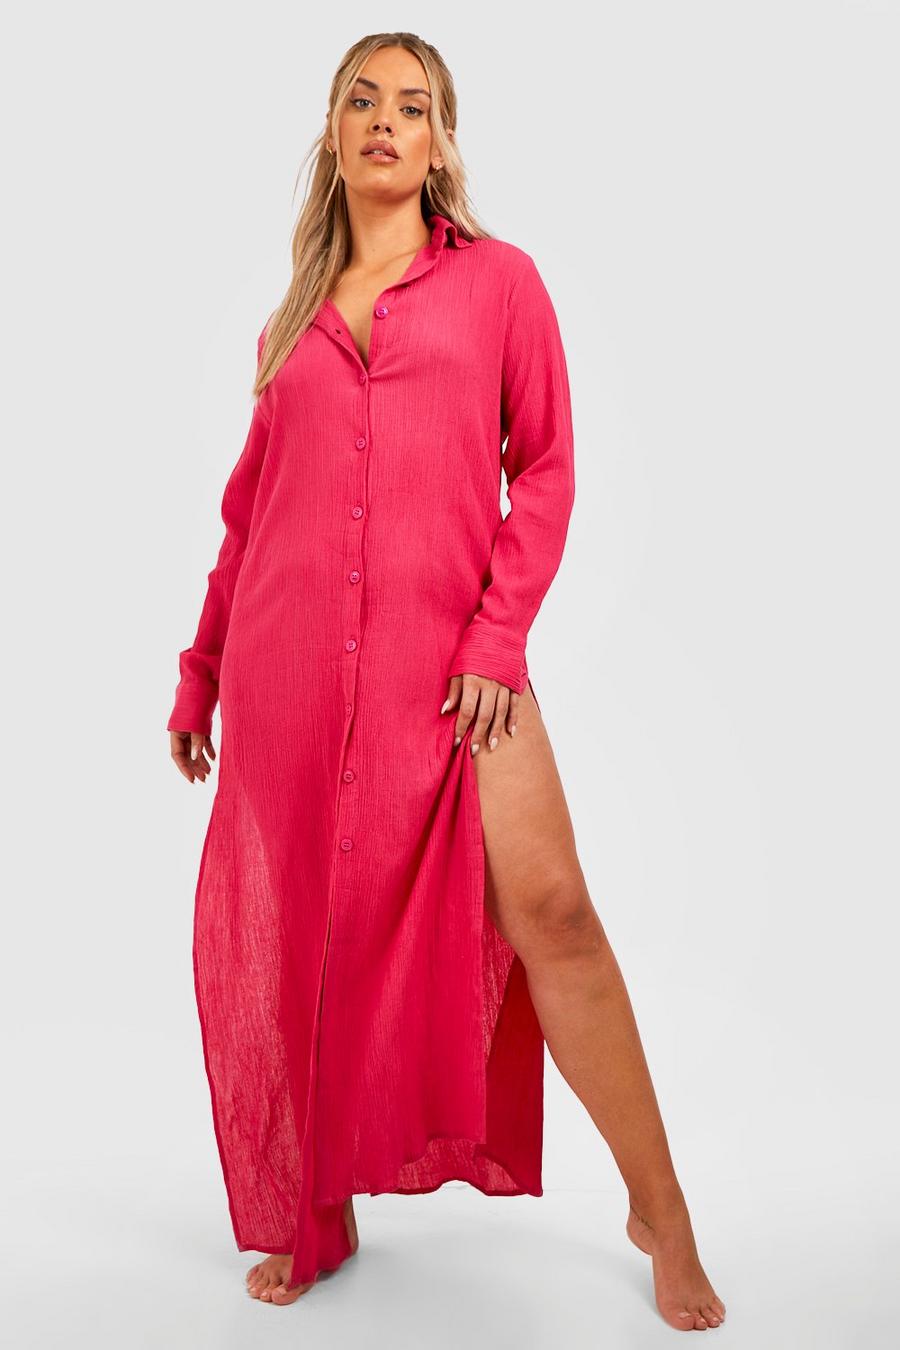 Hot pink Plus Cheesecloth Maxi Beach Cover Up